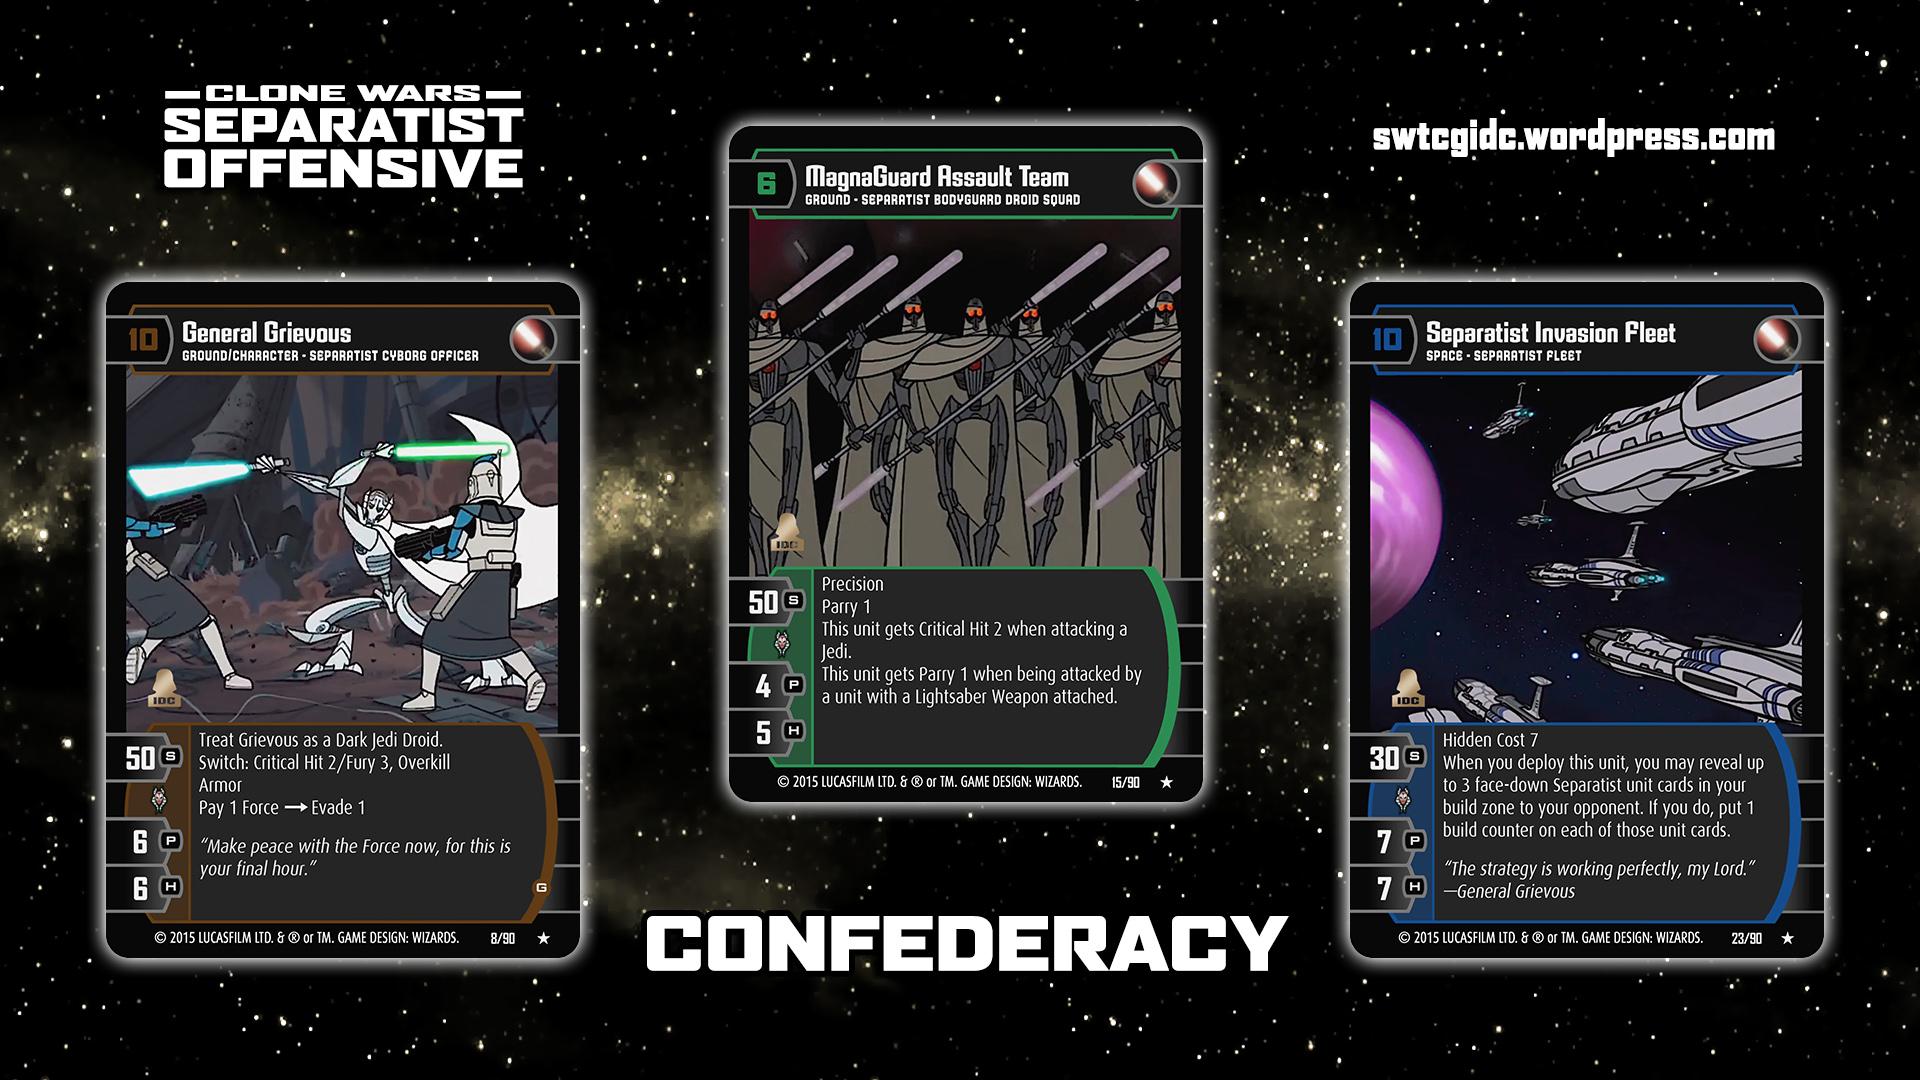 Separatist Offensive. Star Wars Trading Card Game